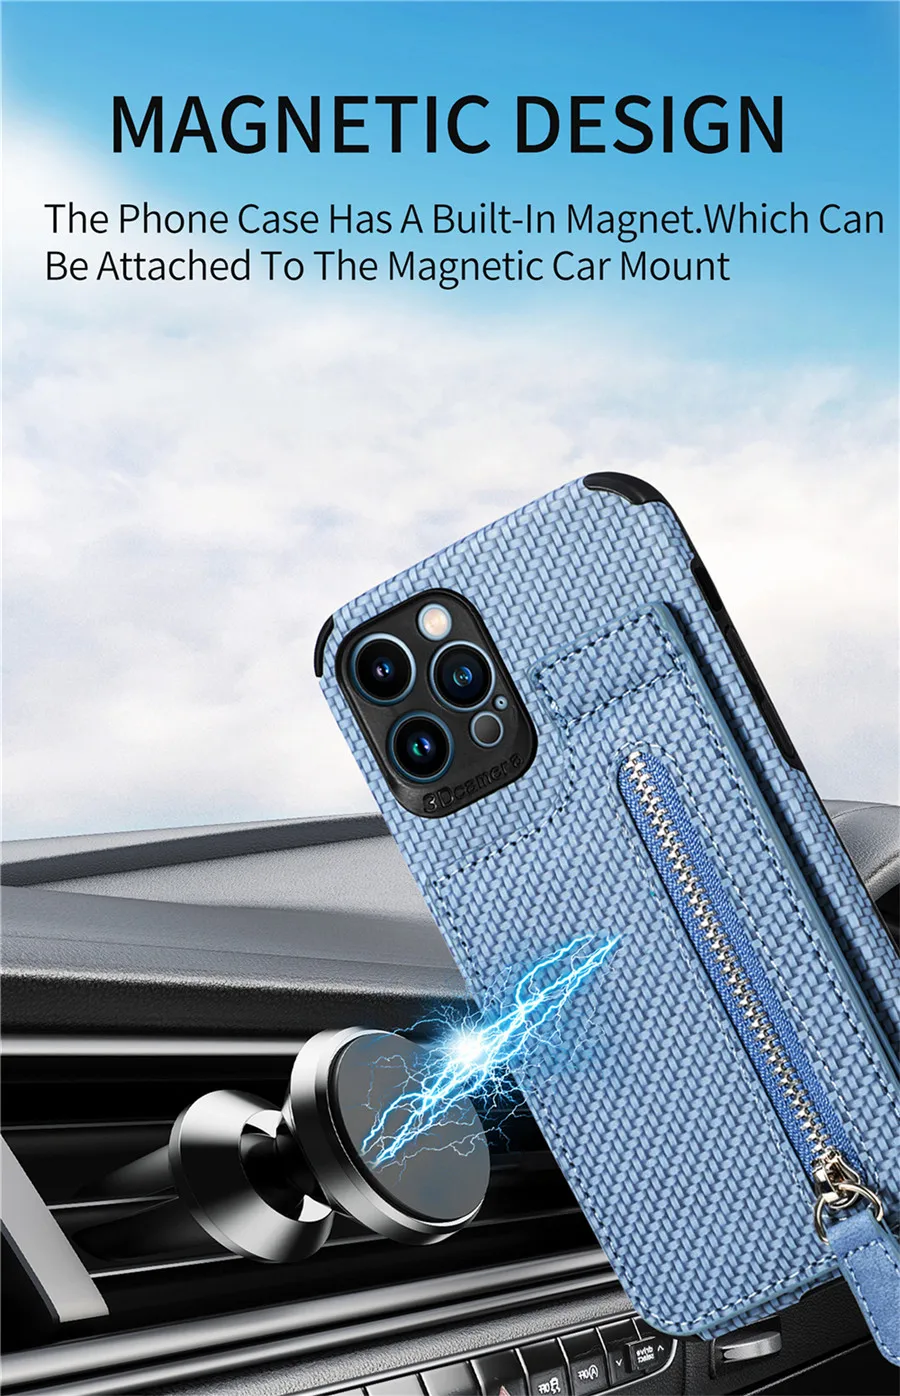 iphone 13 mini case Magnetic Zipper Wallet Carbon Fiber Protection Cover For iPhone 13 Pro Max 12 Mini 11 Case Shockproof Phone Case Coque Fundas iphone 13 mini case clear